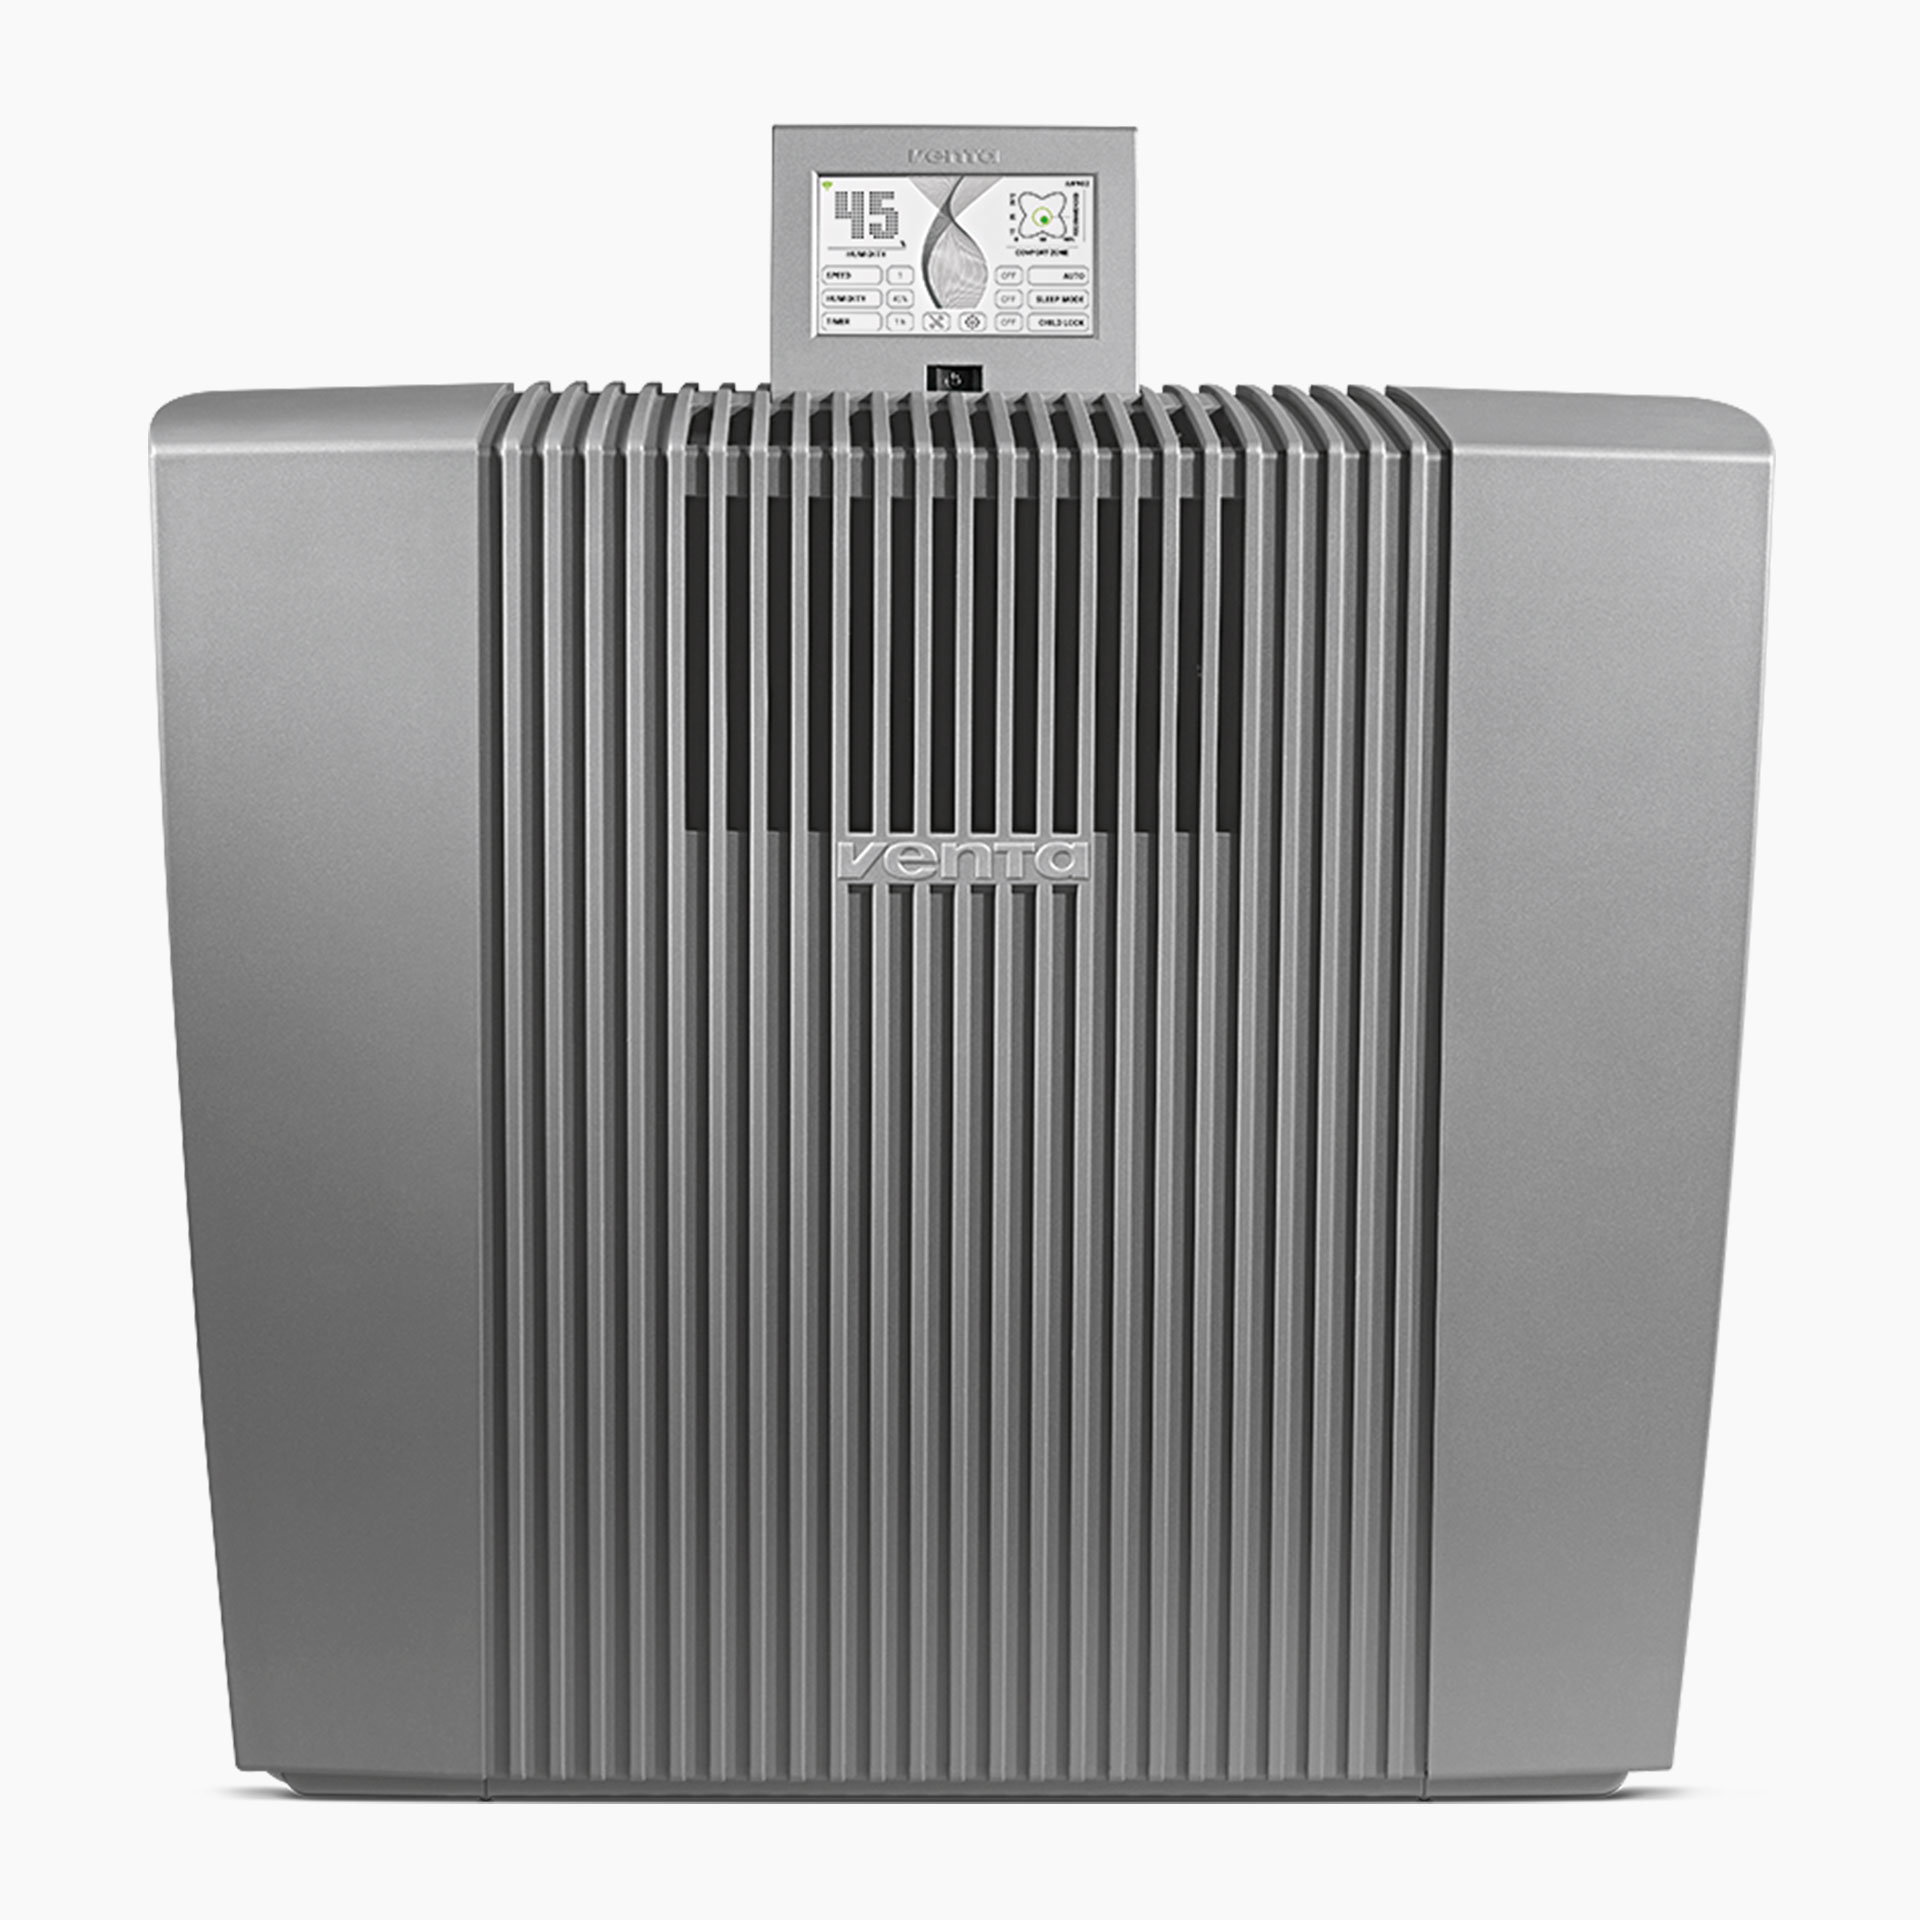 AW902 Professional Air Humidifier + Hygiene disc Pro